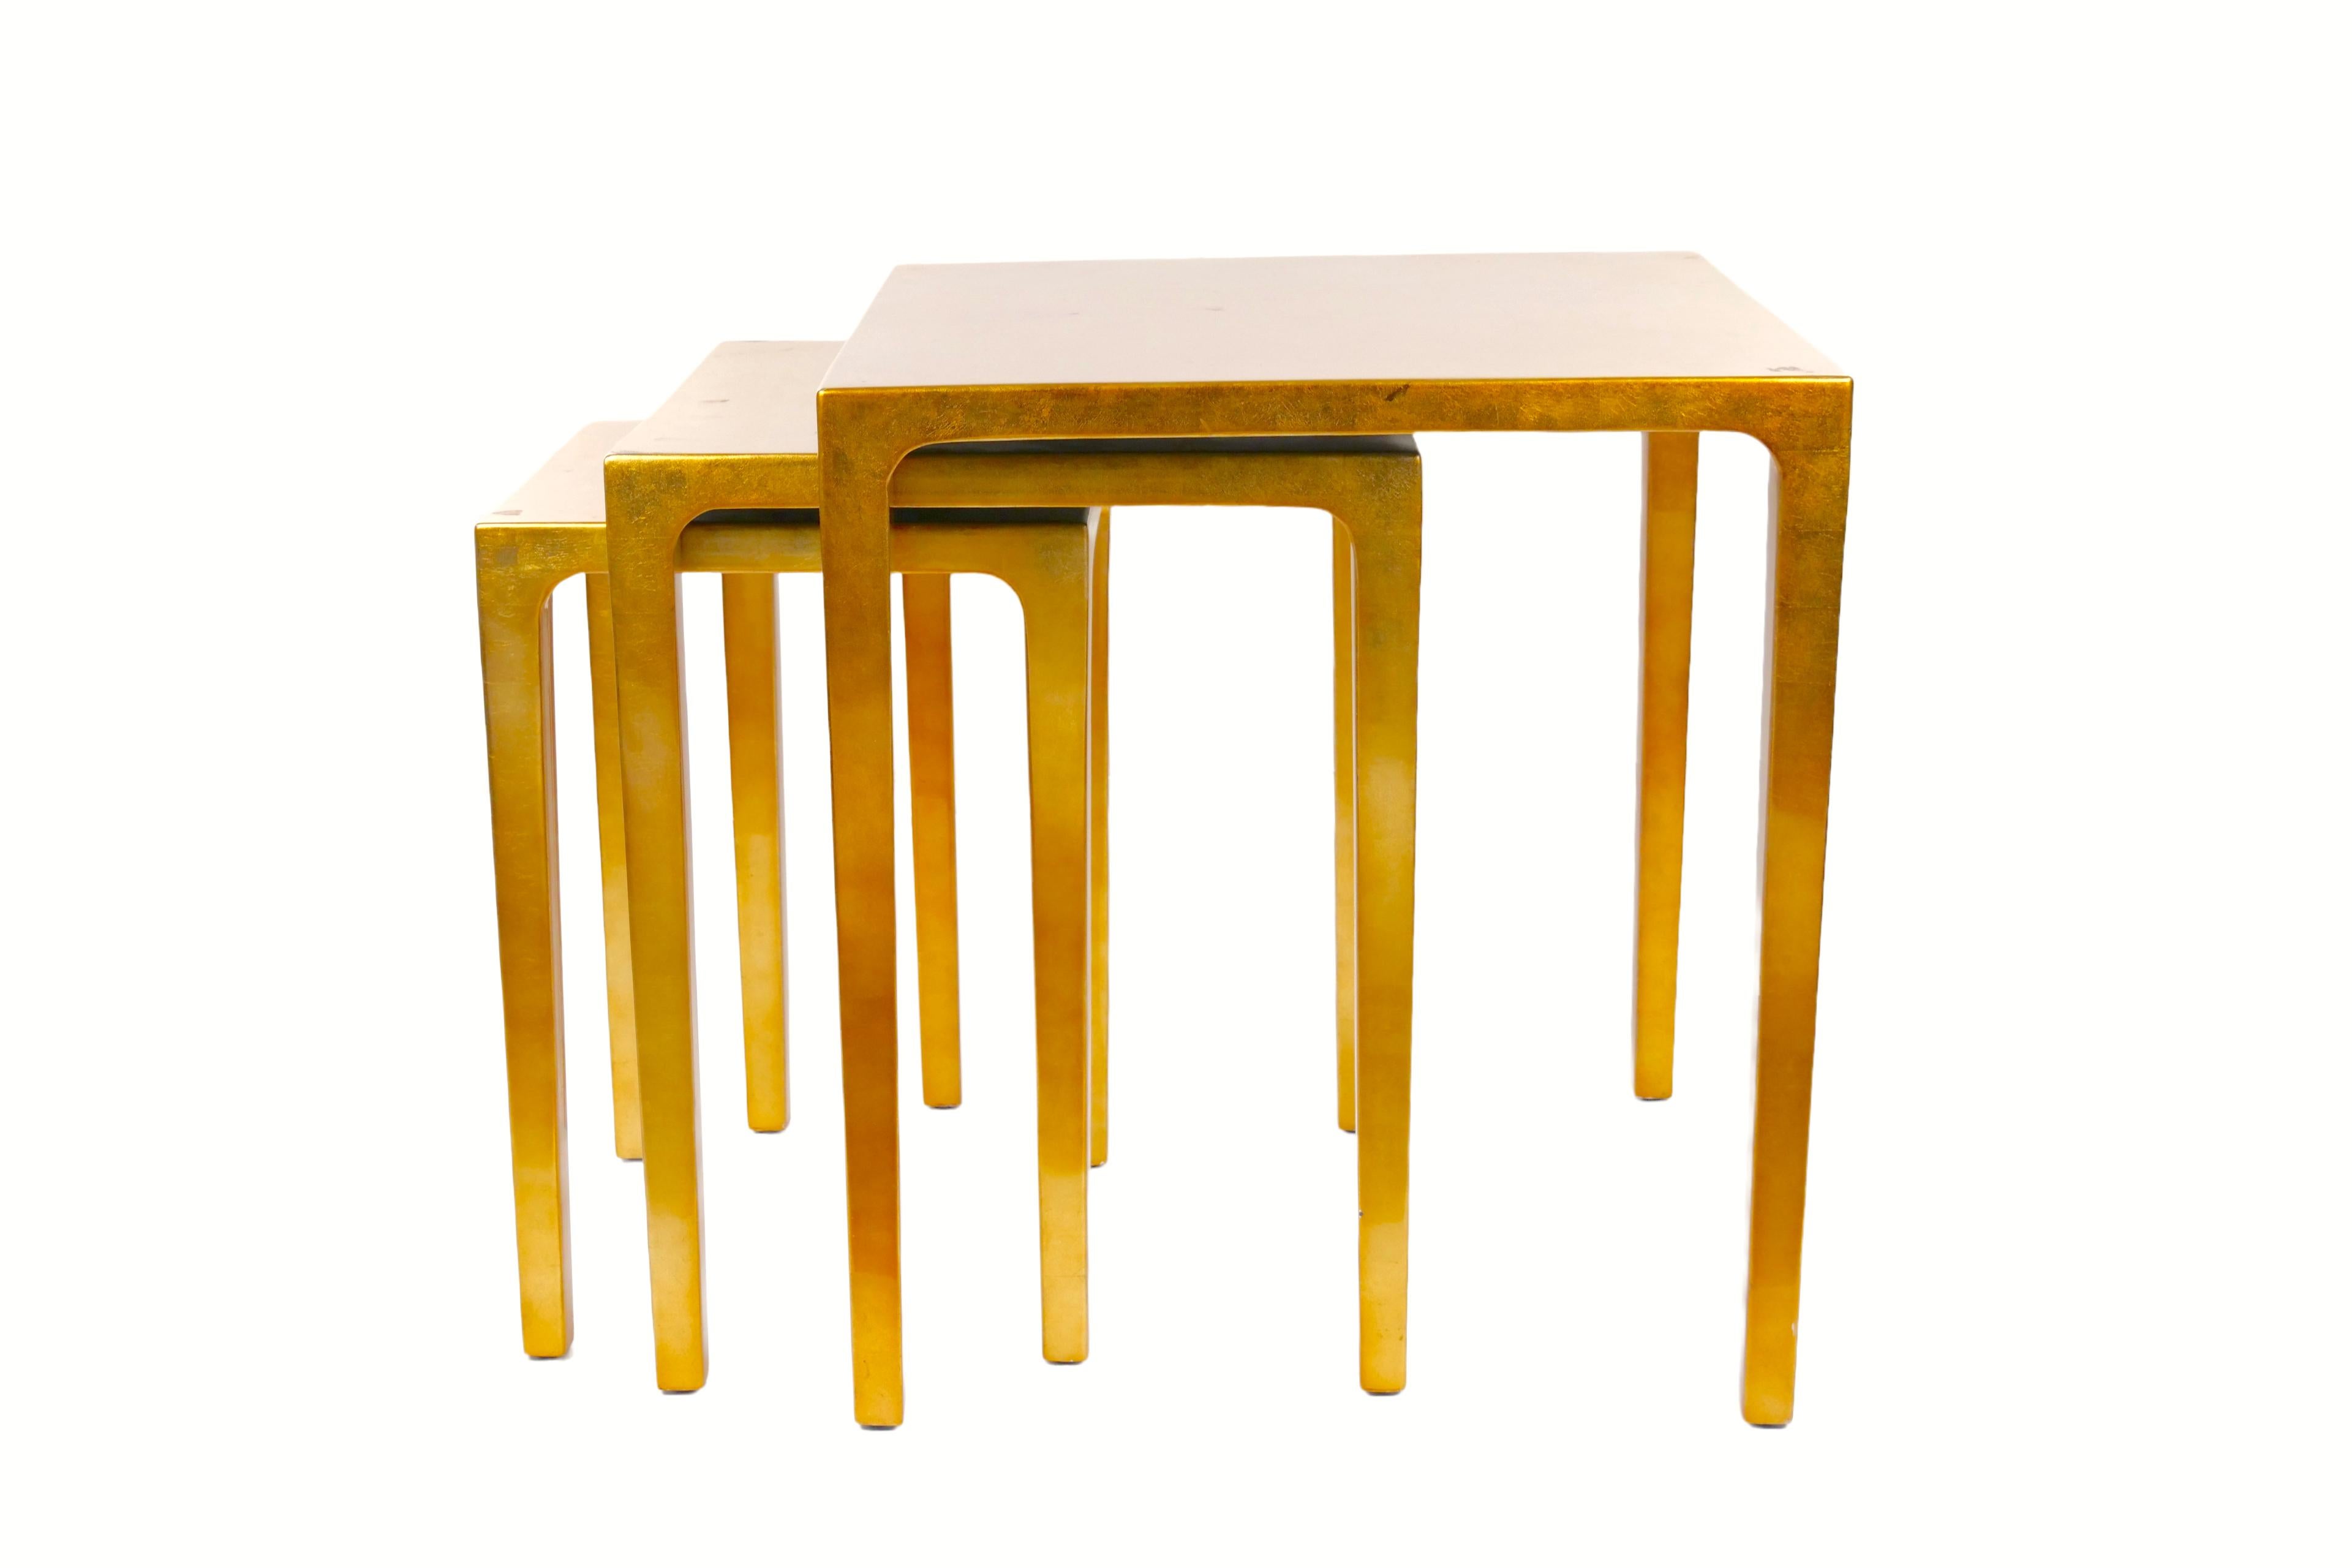 Enhance your living space with this exquisite set of three mid-century modern nesting side tables, Crafted with meticulous attention to detail. These stunning tables features a lustrous lacquered gold leaf finish that adds a touch of opulence to any